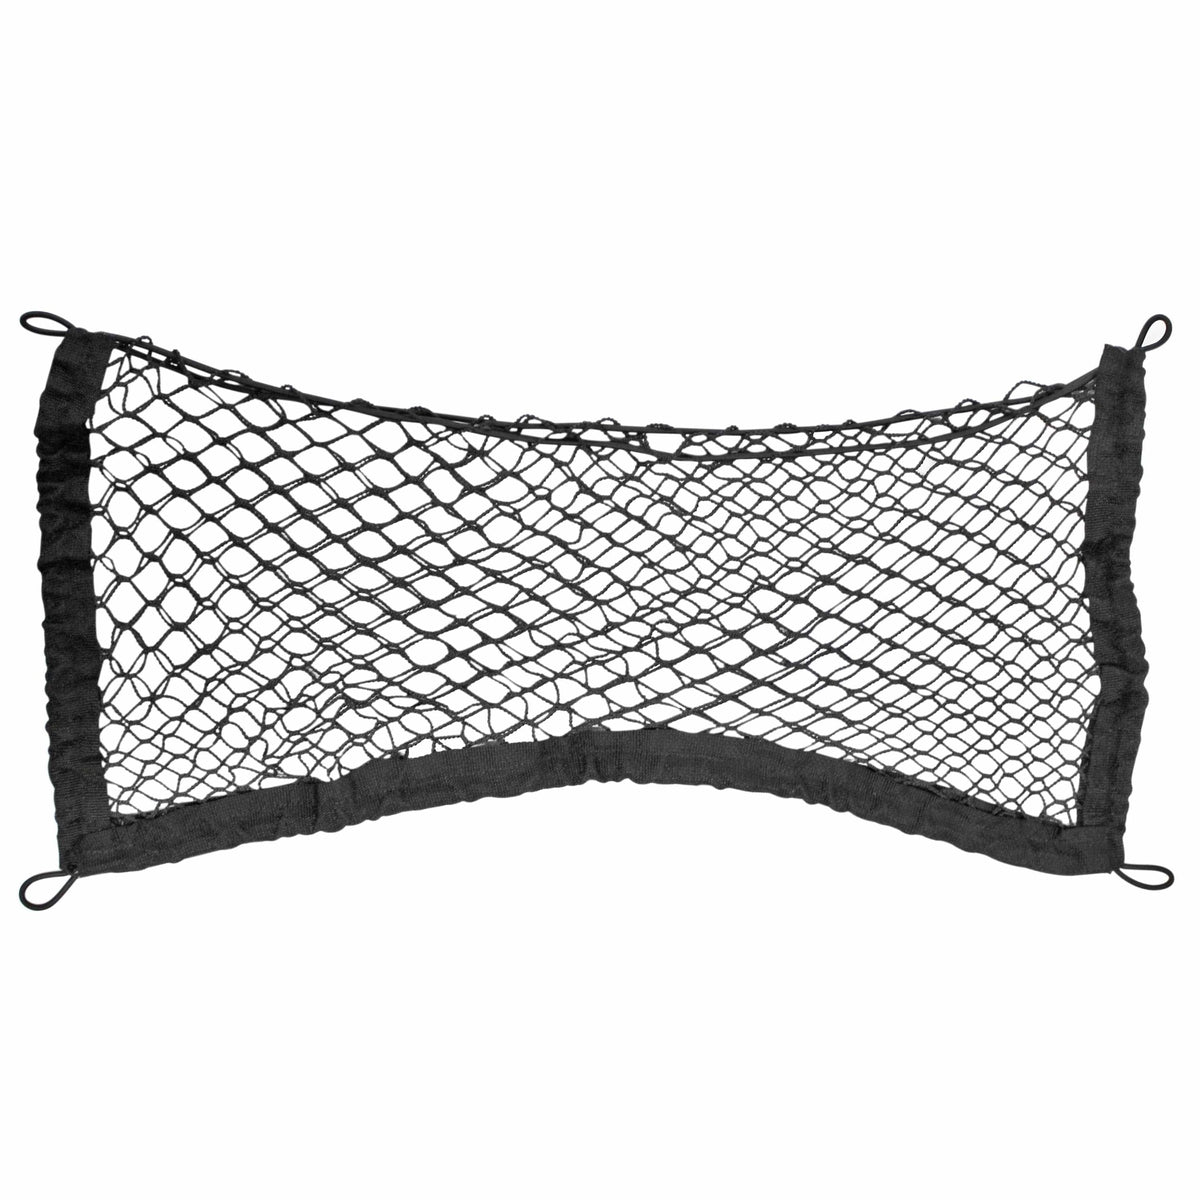 Rig Rite Qualifies for Free Shipping Rig Rite Pocket Cargo Storage Net #1400